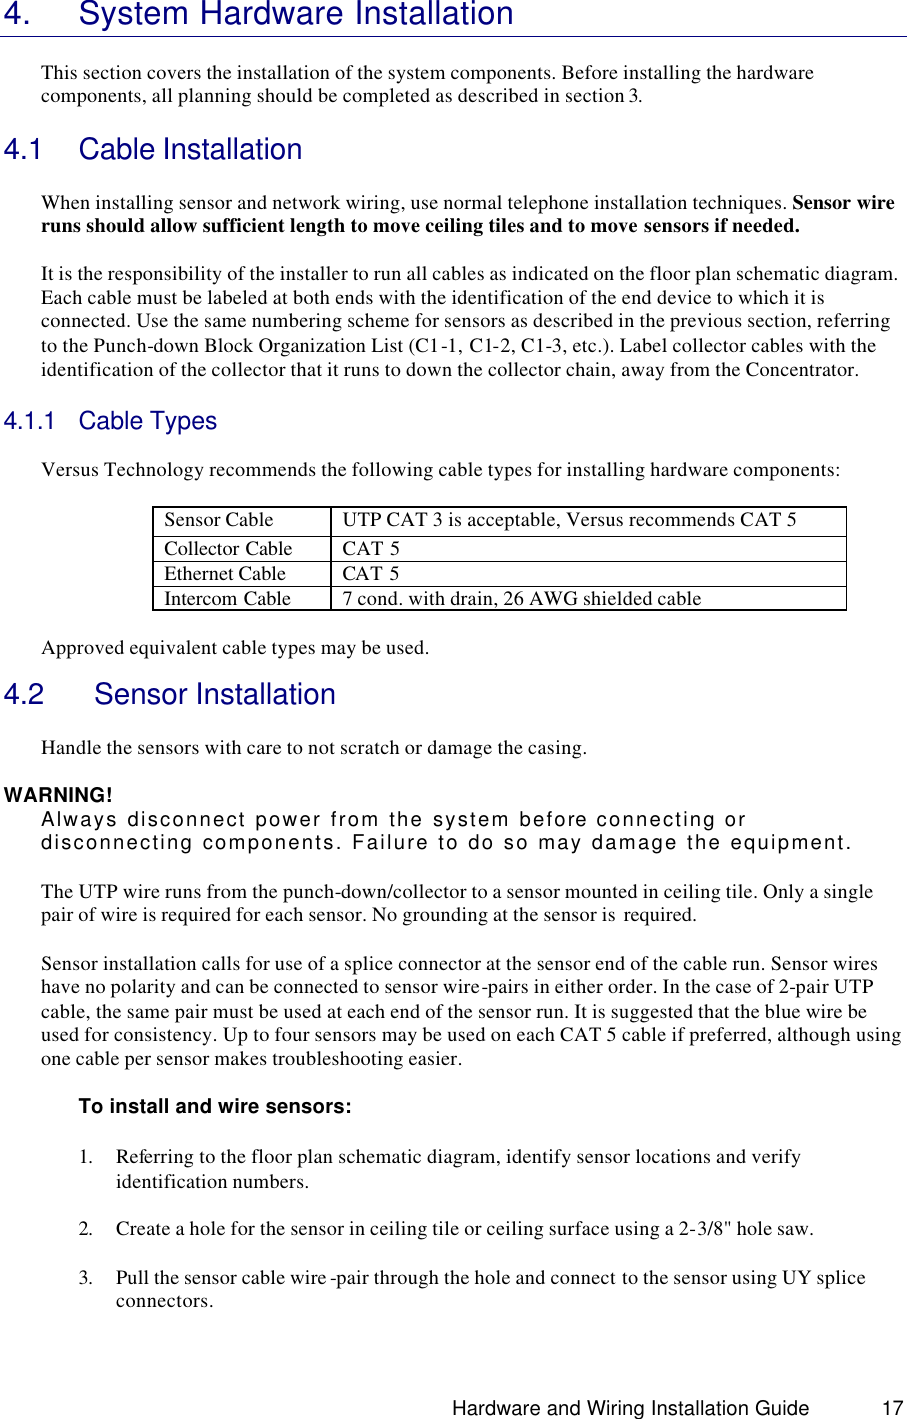                                                                               Hardware and Wiring Installation Guide 17 4. System Hardware Installation  This section covers the installation of the system components. Before installing the hardware components, all planning should be completed as described in section 3.  4.1 Cable Installation   When installing sensor and network wiring, use normal telephone installation techniques. Sensor wire runs should allow sufficient length to move ceiling tiles and to move sensors if needed.    It is the responsibility of the installer to run all cables as indicated on the floor plan schematic diagram. Each cable must be labeled at both ends with the identification of the end device to which it is connected. Use the same numbering scheme for sensors as described in the previous section, referring to the Punch-down Block Organization List (C1-1, C1-2, C1-3, etc.). Label collector cables with the identification of the collector that it runs to down the collector chain, away from the Concentrator.  4.1.1 Cable Types   Versus Technology recommends the following cable types for installing hardware components:  Sensor Cable  UTP CAT 3 is acceptable, Versus recommends CAT 5 Collector Cable CAT 5 Ethernet Cable CAT 5 Intercom Cable 7 cond. with drain, 26 AWG shielded cable  Approved equivalent cable types may be used.   4.2   Sensor Installation  Handle the sensors with care to not scratch or damage the casing.  WARNING! Always disconnect power from the system before connecting or disconnecting components. Failure to do so may damage the equipment.  The UTP wire runs from the punch-down/collector to a sensor mounted in ceiling tile. Only a single pair of wire is required for each sensor. No grounding at the sensor is  required.   Sensor installation calls for use of a splice connector at the sensor end of the cable run. Sensor wires have no polarity and can be connected to sensor wire-pairs in either order. In the case of 2-pair UTP cable, the same pair must be used at each end of the sensor run. It is suggested that the blue wire be used for consistency. Up to four sensors may be used on each CAT 5 cable if preferred, although using one cable per sensor makes troubleshooting easier.    To install and wire sensors:  1. Referring to the floor plan schematic diagram, identify sensor locations and verify identification numbers.  2. Create a hole for the sensor in ceiling tile or ceiling surface using a 2-3/8&quot; hole saw.  3. Pull the sensor cable wire -pair through the hole and connect to the sensor using UY splice connectors.  